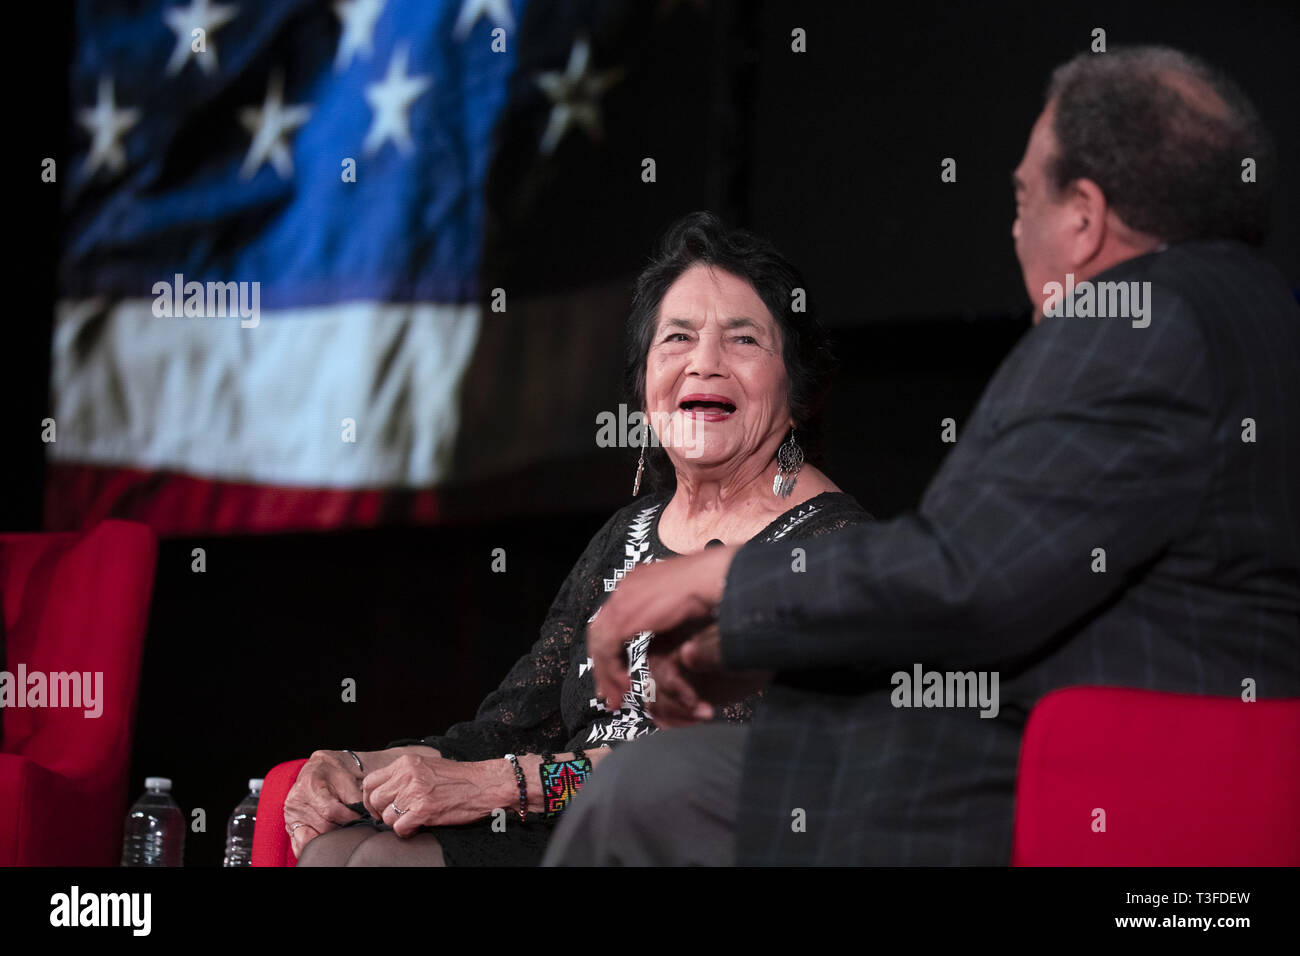 Austin, Texas, USA. 8th Apr, 2019. The LBJ Library's ''Summit on Race'' opens with a discussion of civil rights featuring farmworker activist Dolores Huerta and U.N. Ambassador and civil rights icon Andrew Young interviewed by LBJ Director Mark Updegrove. Huerta noted ''We haven't been able to even try to eliminate racism'' in the U.S. Credit: Bob Daemmrich/ZUMA Wire/Alamy Live News Stock Photo